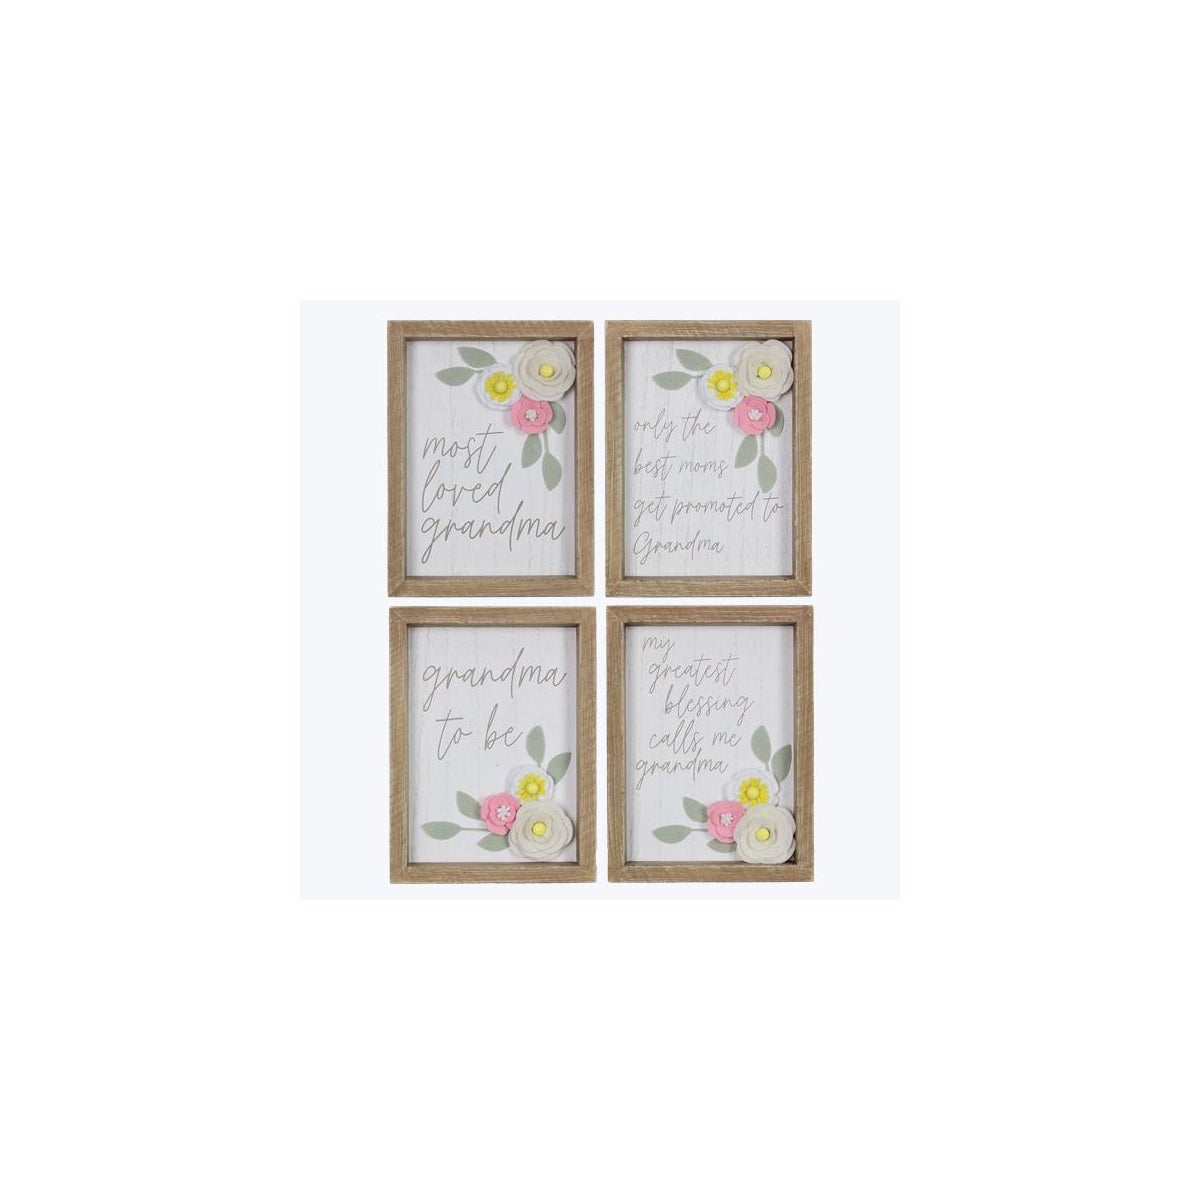 Wood Framed Grandma Wall/Tabletop Sign With Felt Flowers 4 Assorted